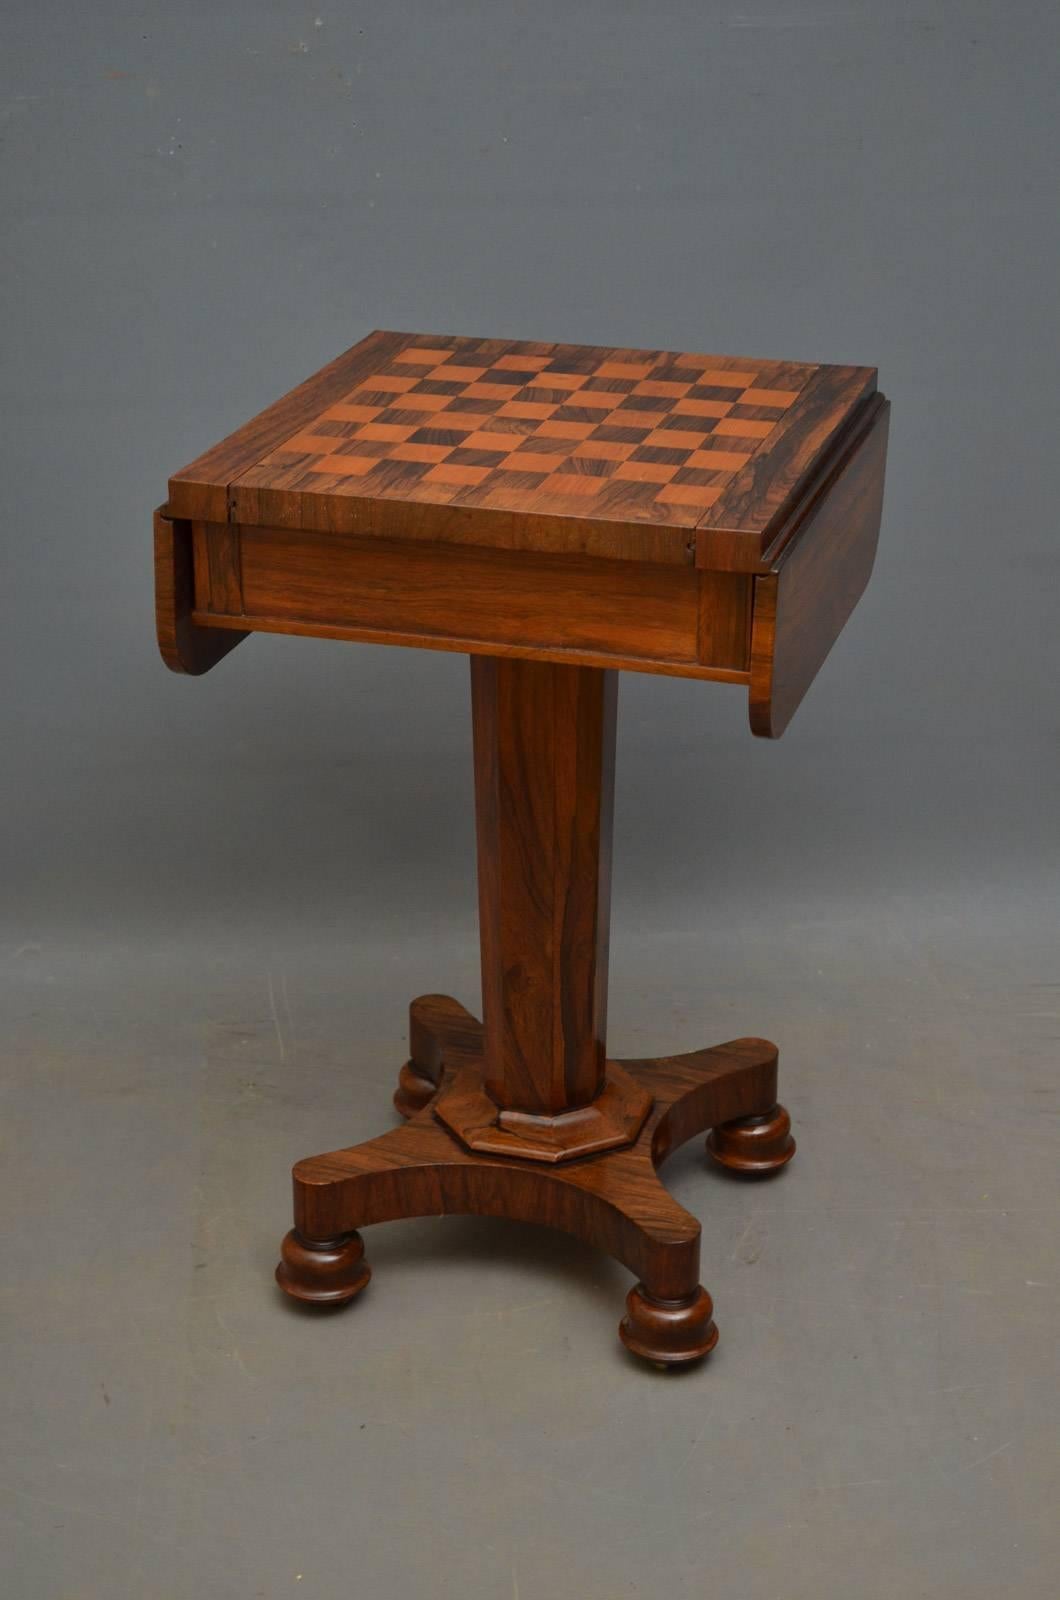 Sn4262, unusual William IV chess table in rosewood, having drop leaf top with sliding chess board and flat faceted column terminating in quatrefoil base, turned feel and castors. This antique table retains its original finish which has been cleaned,